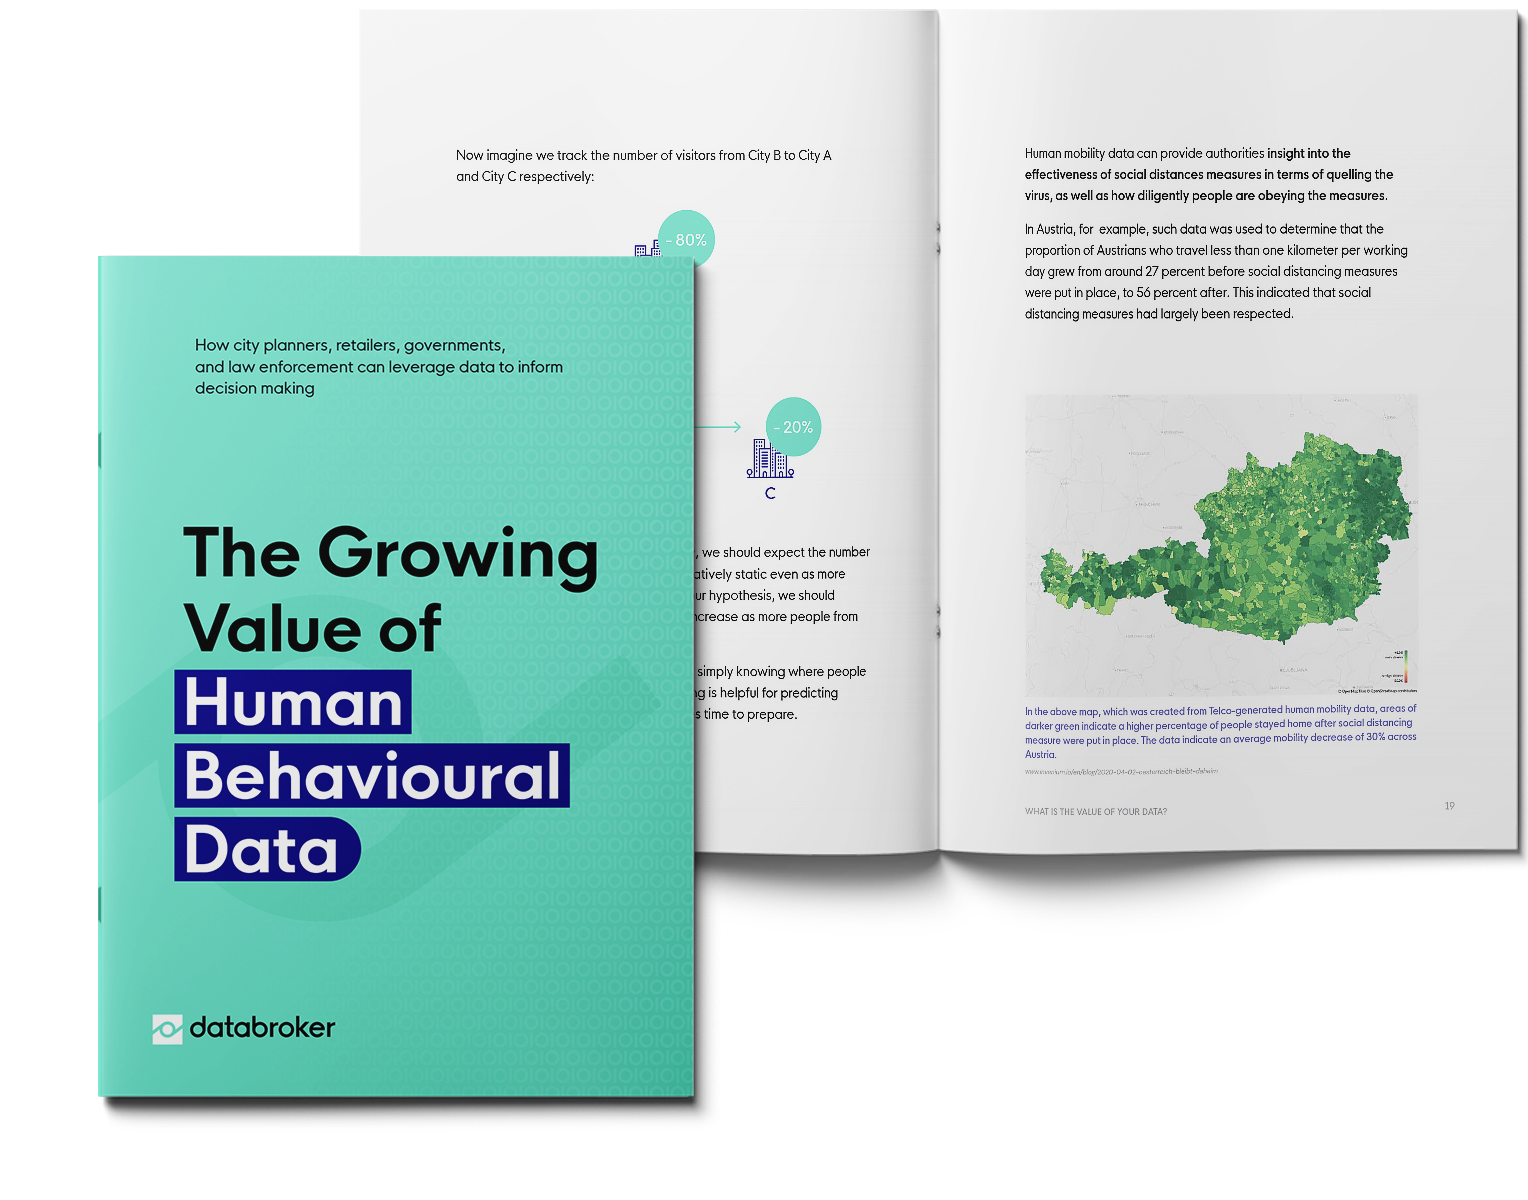 The growing value of human behavioural data - Databroker use-case guide